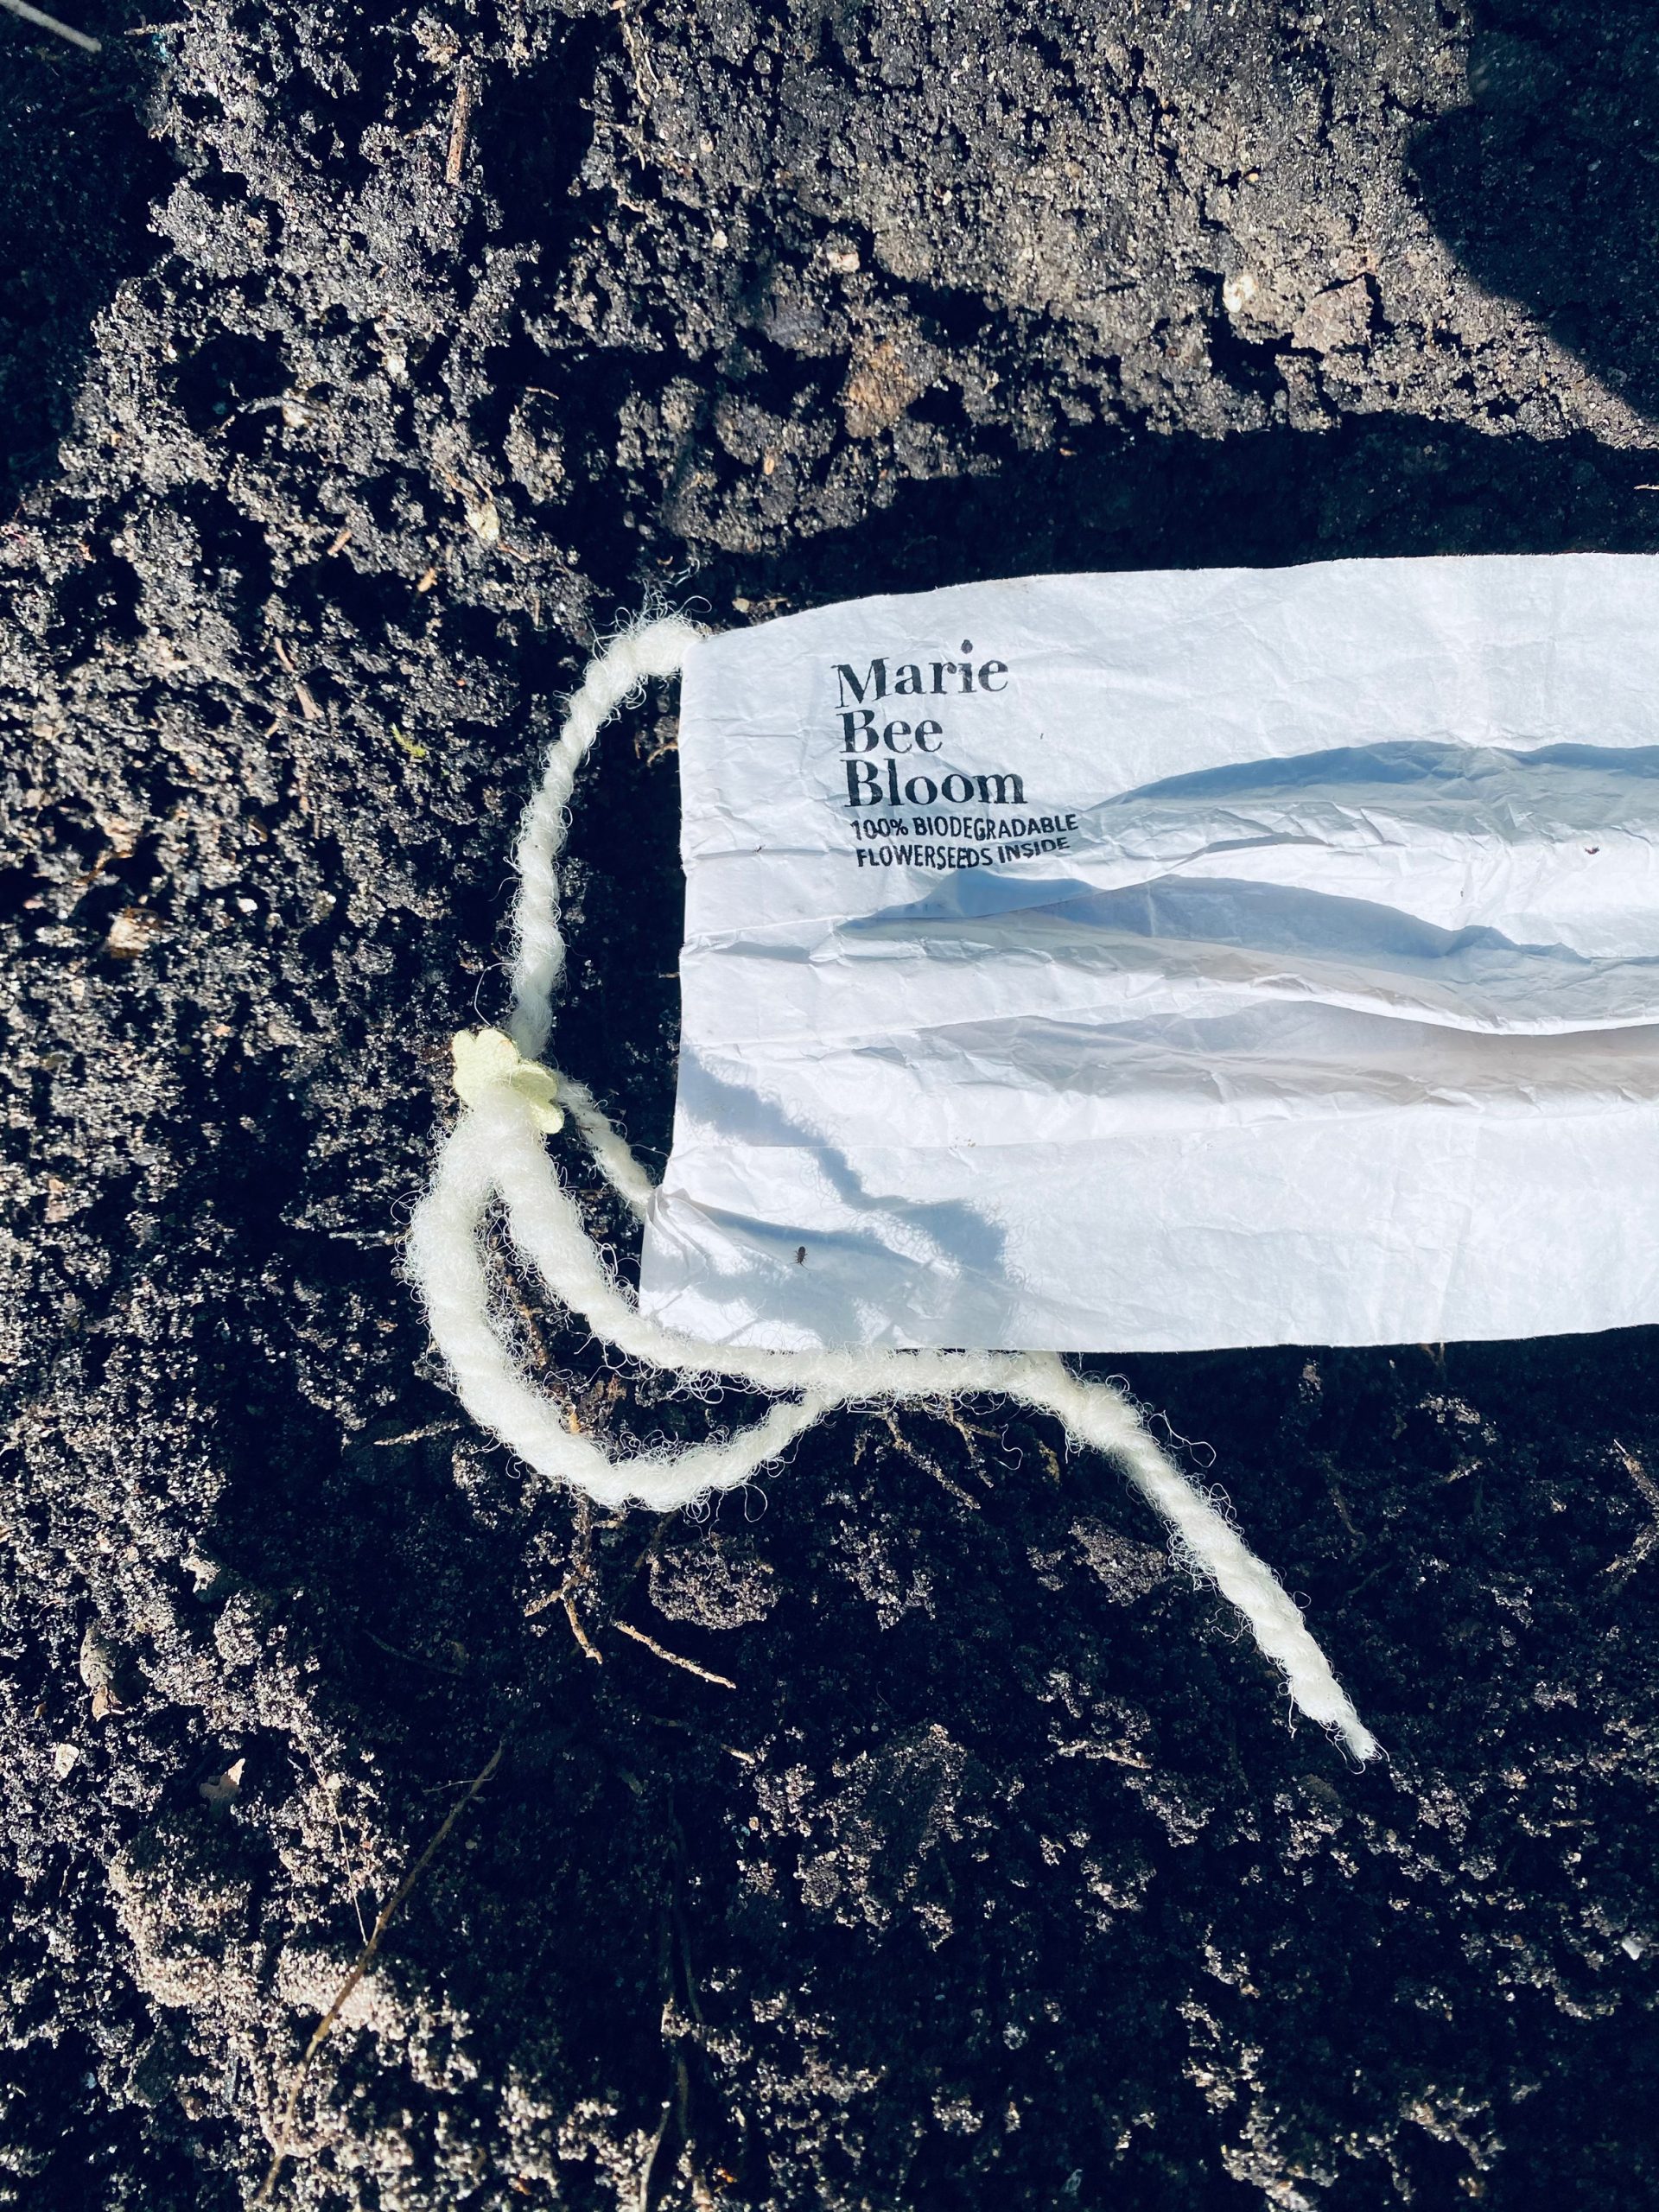 Biodegradable Marie Bee Bloom face mask in soil